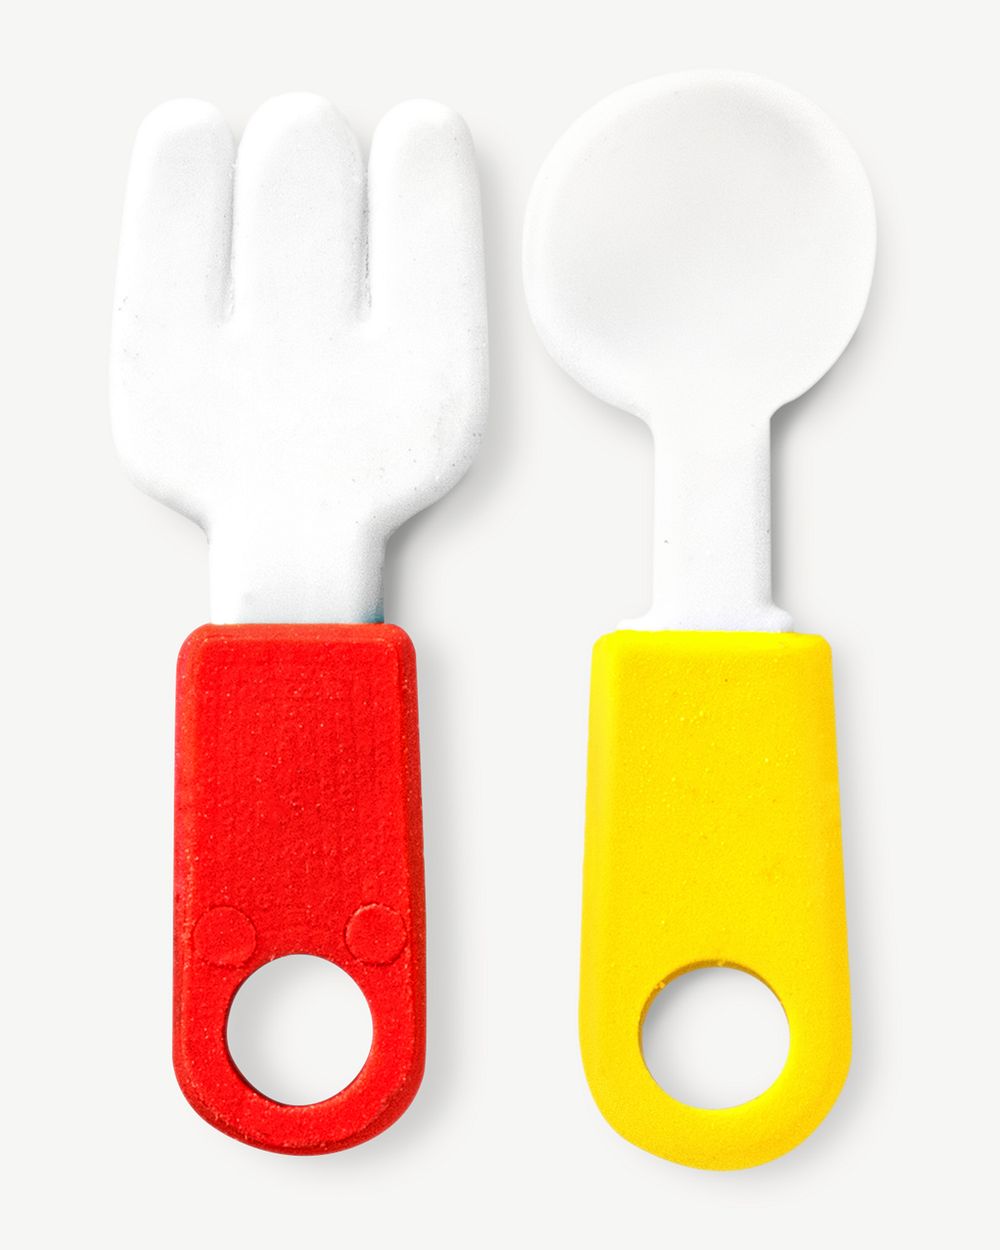 Kitchen and cooking utensil toys collage element psd.